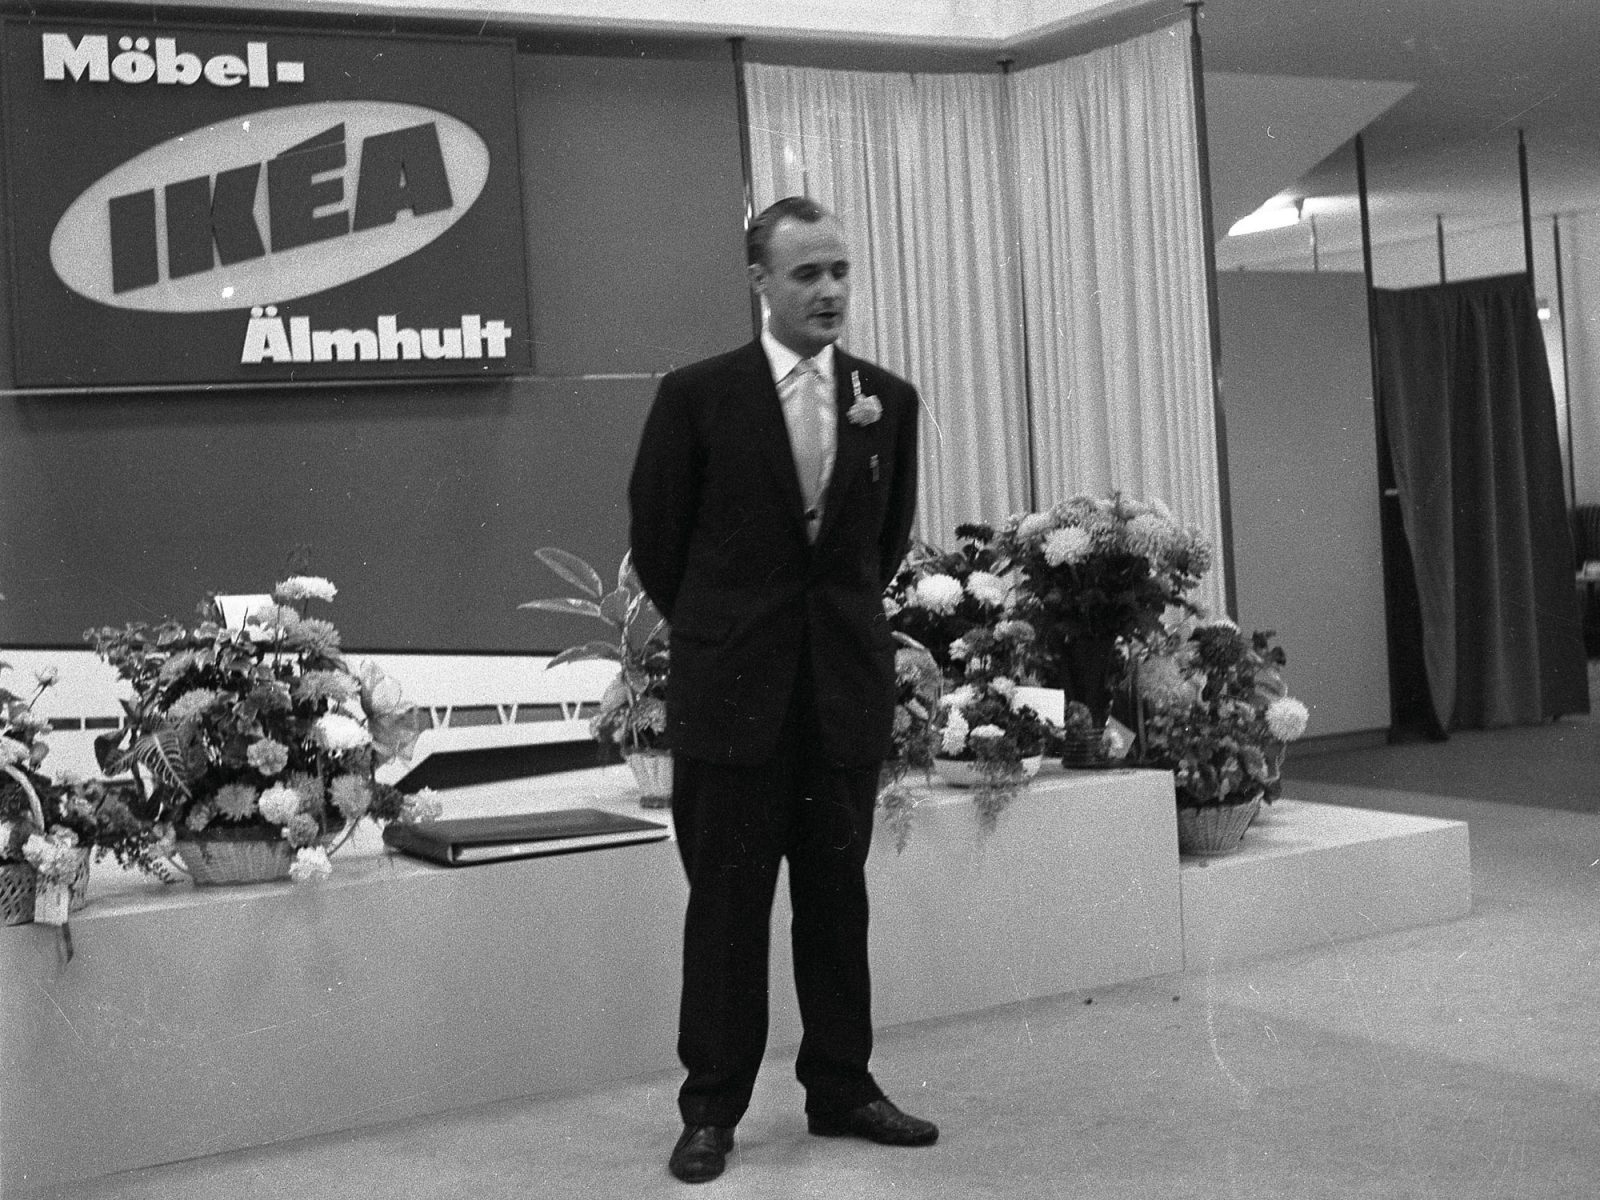 A young Ingvar Kamprad gives a speech wearing a dark suit in front of a large IKEA sign and lots of flowers.